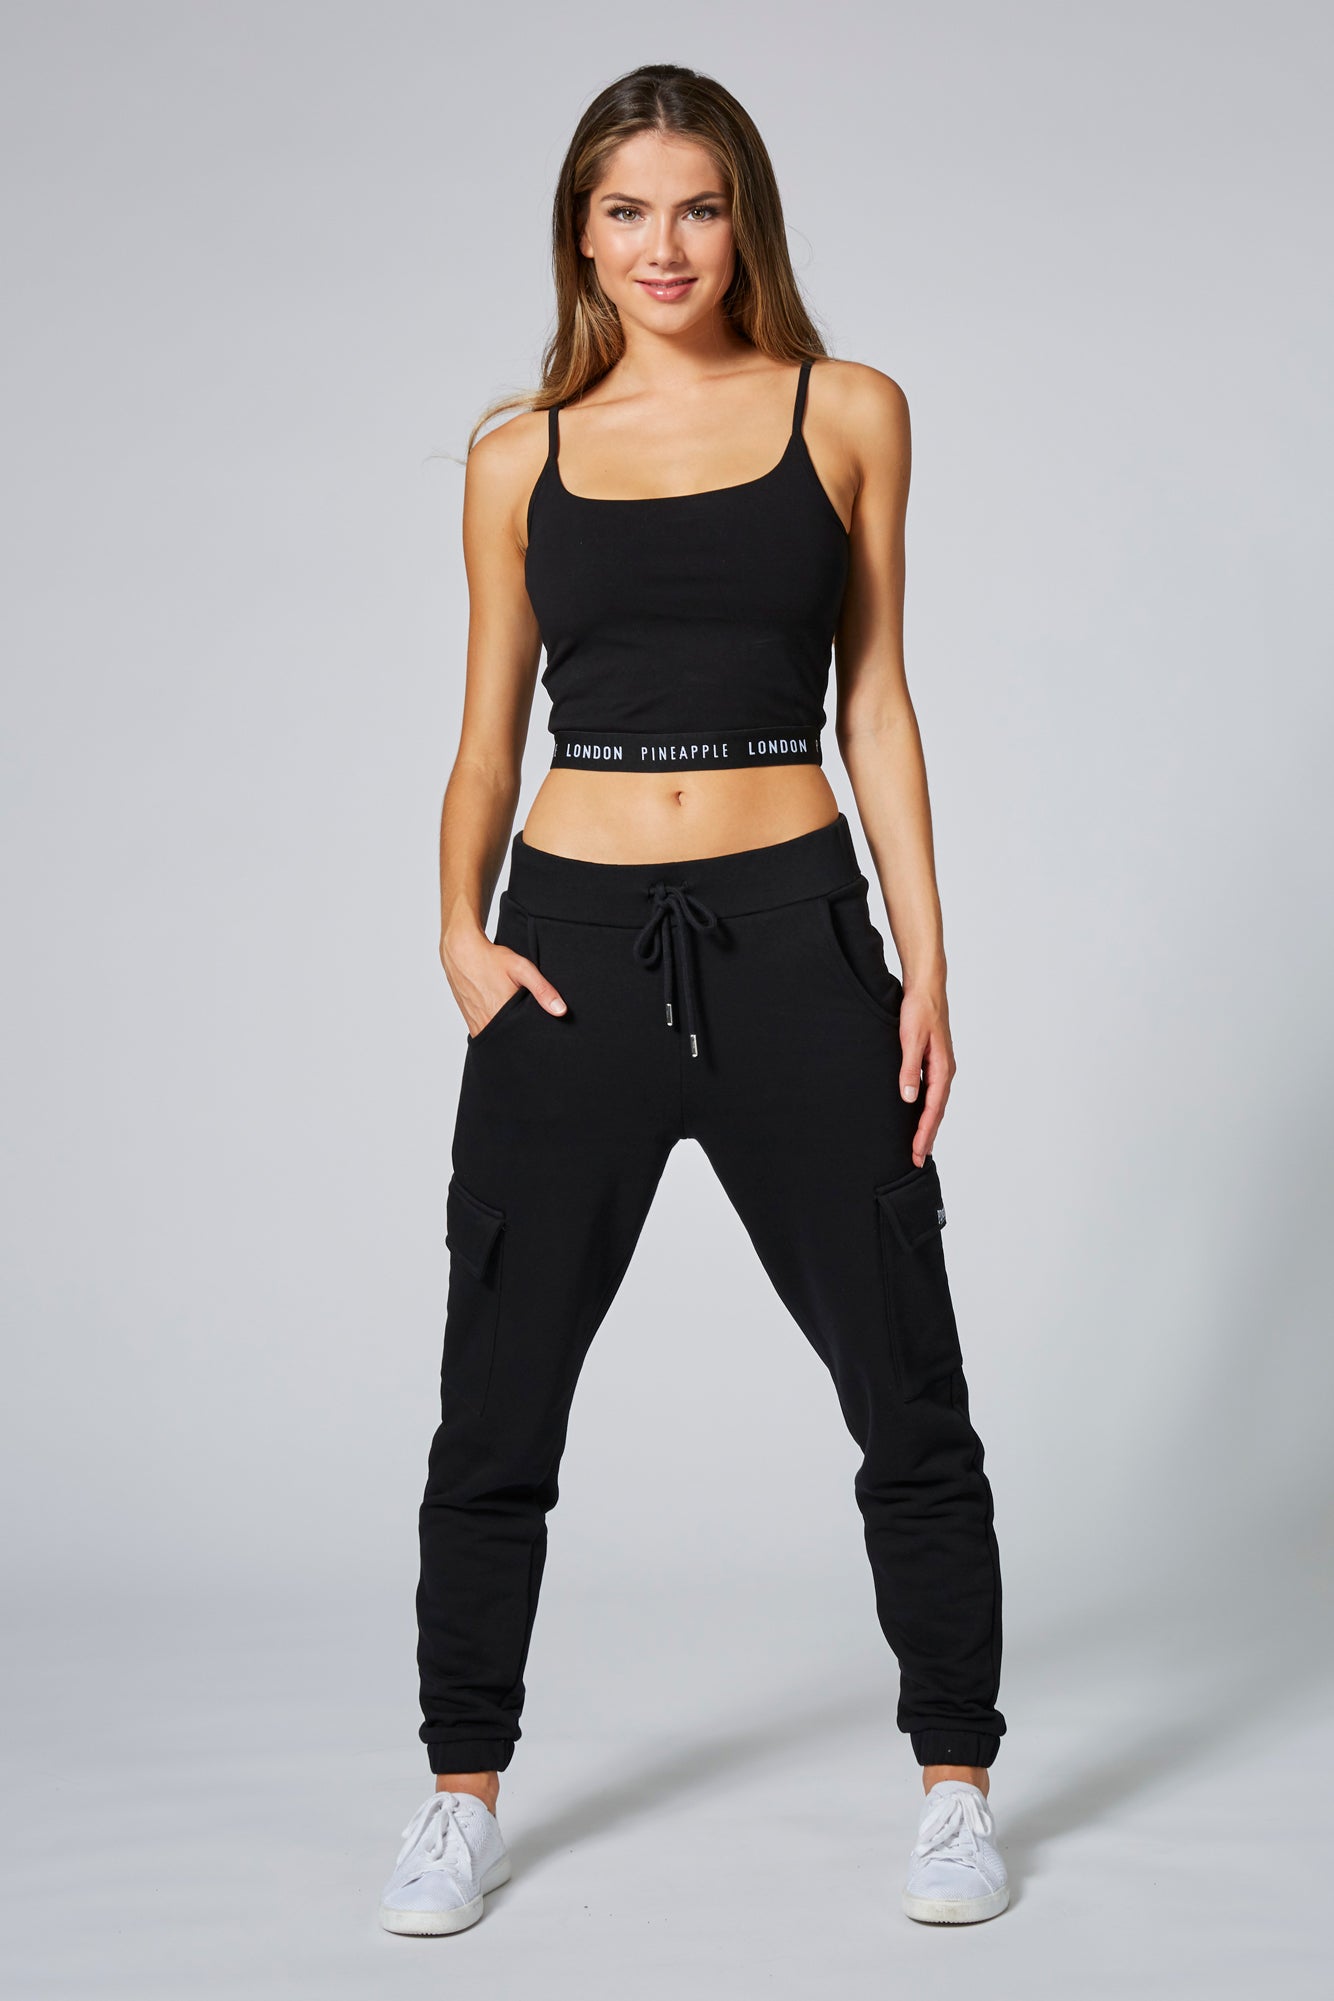 Joggers & Trousers for Women  Made For Movement & Inspired by Dance